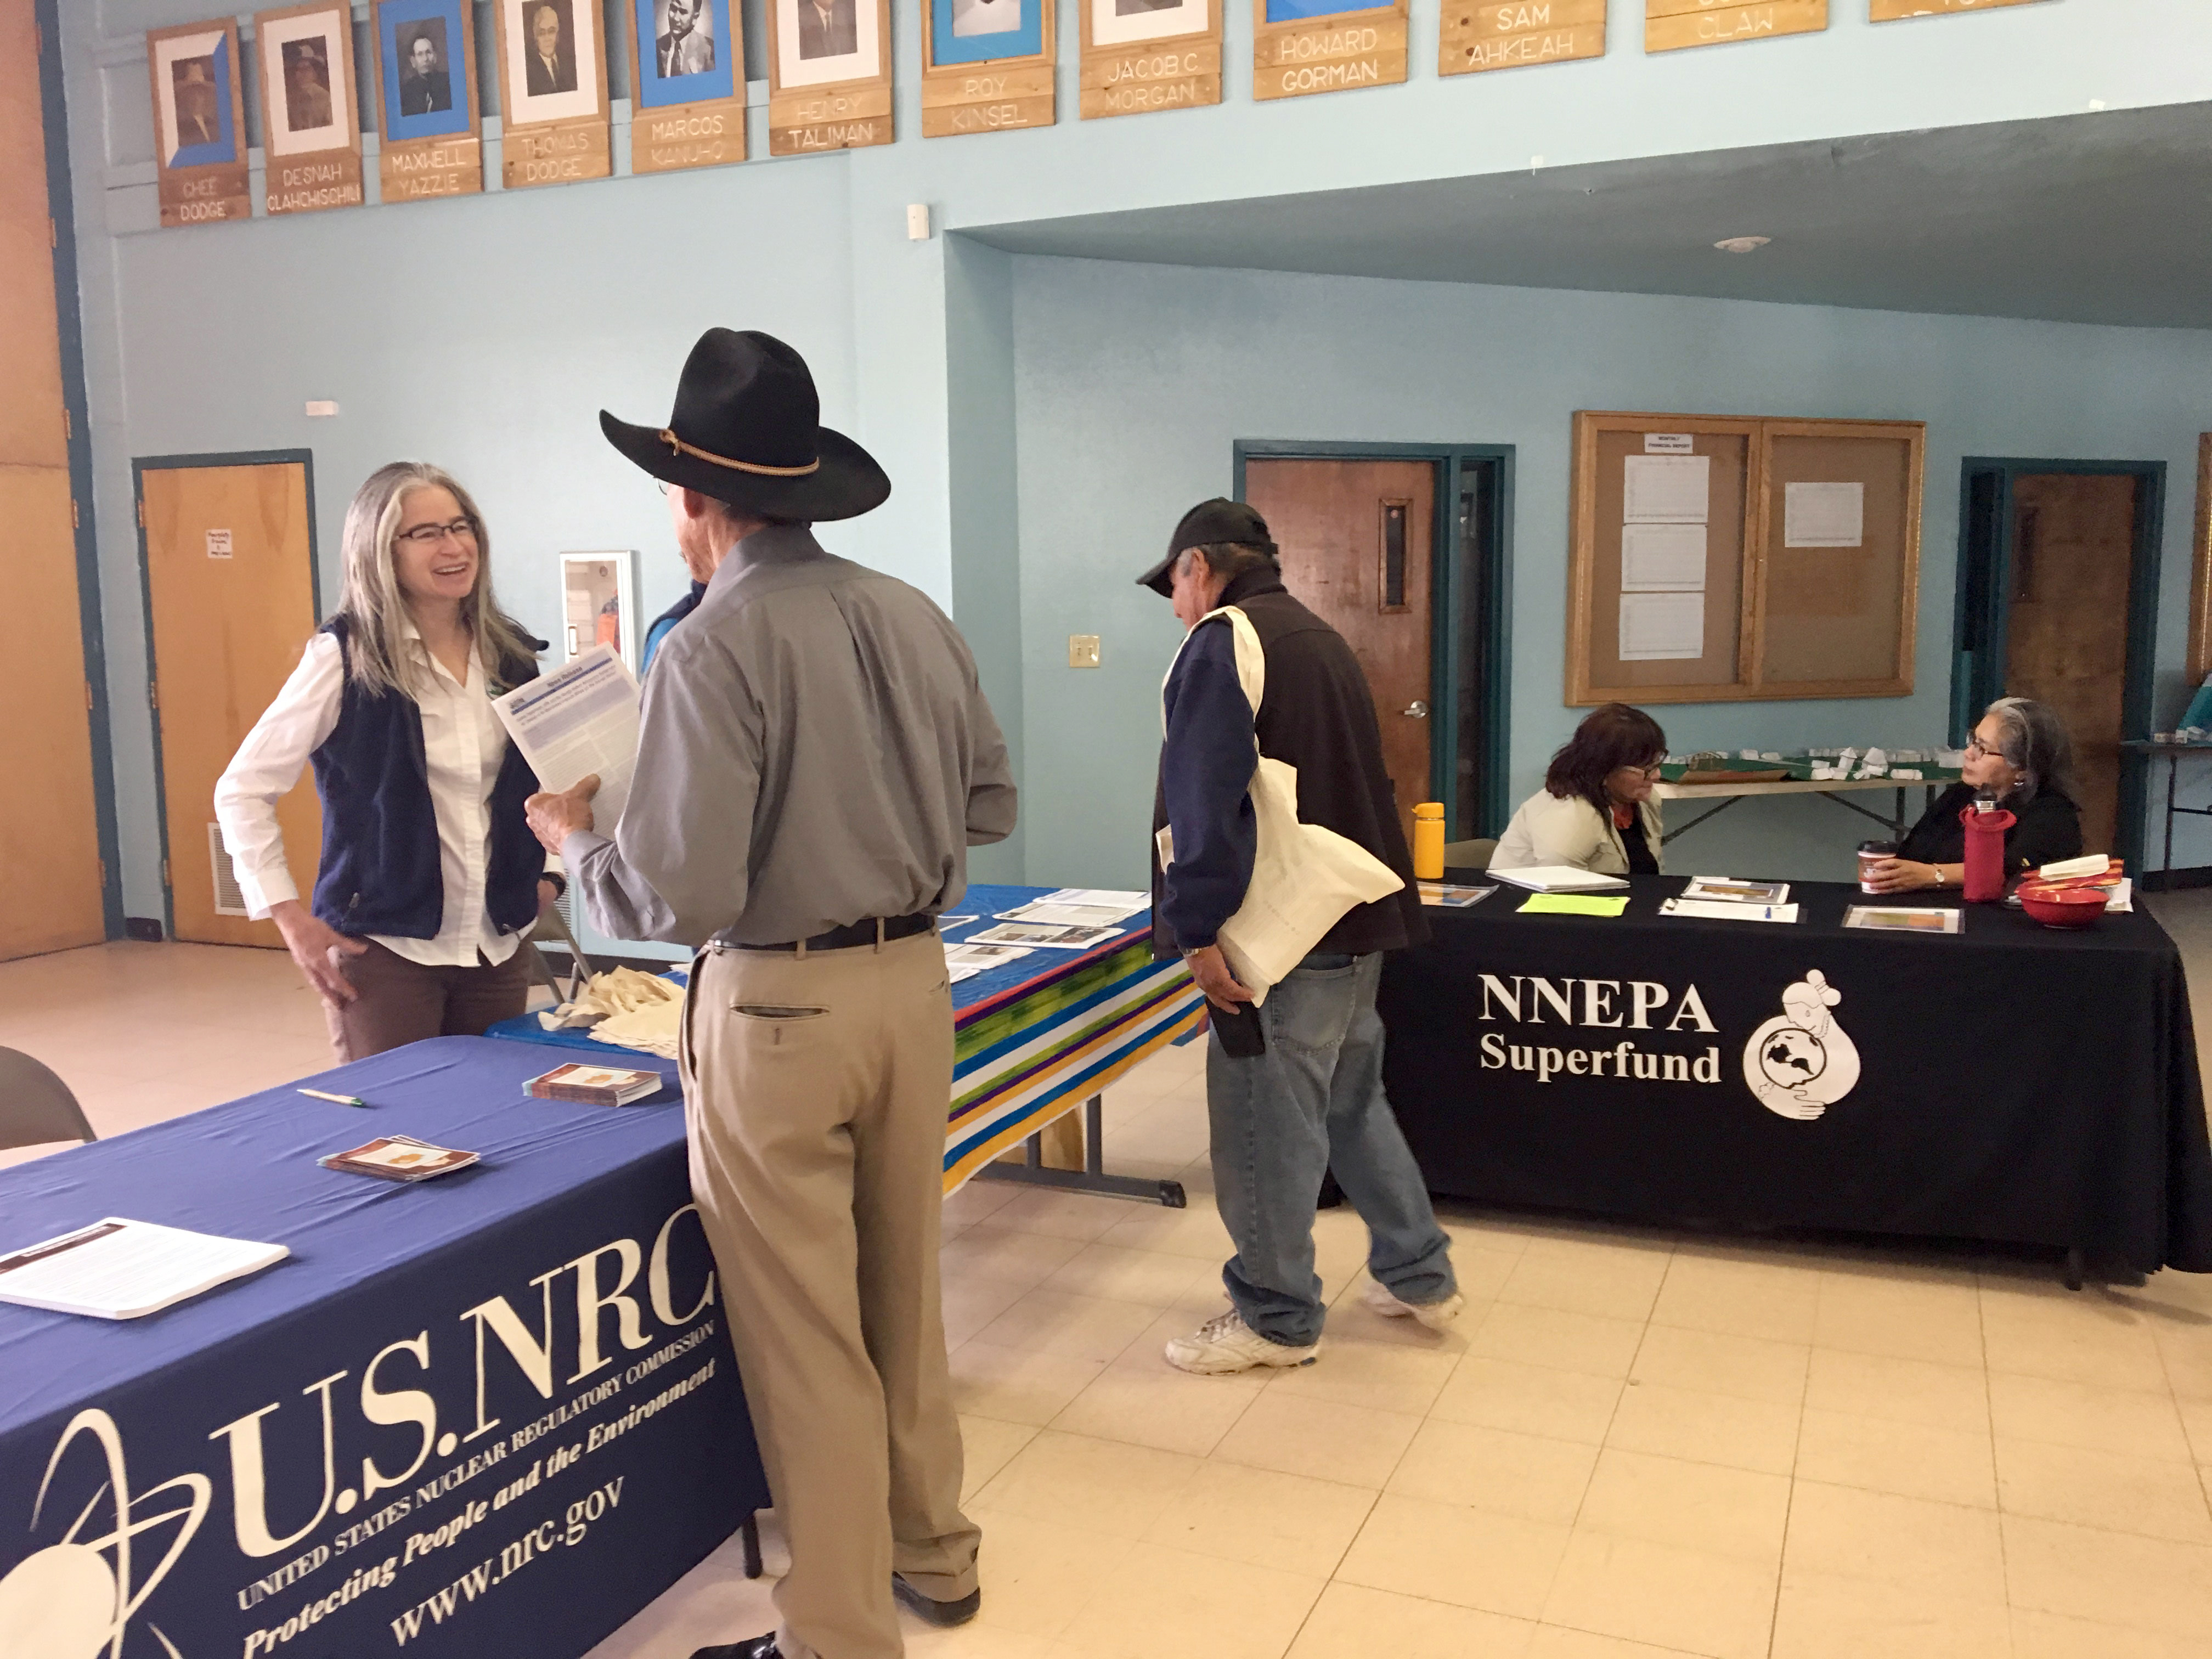 Information booths set up by U.S. NRC and NNEPA Superfund performing doing community outreach